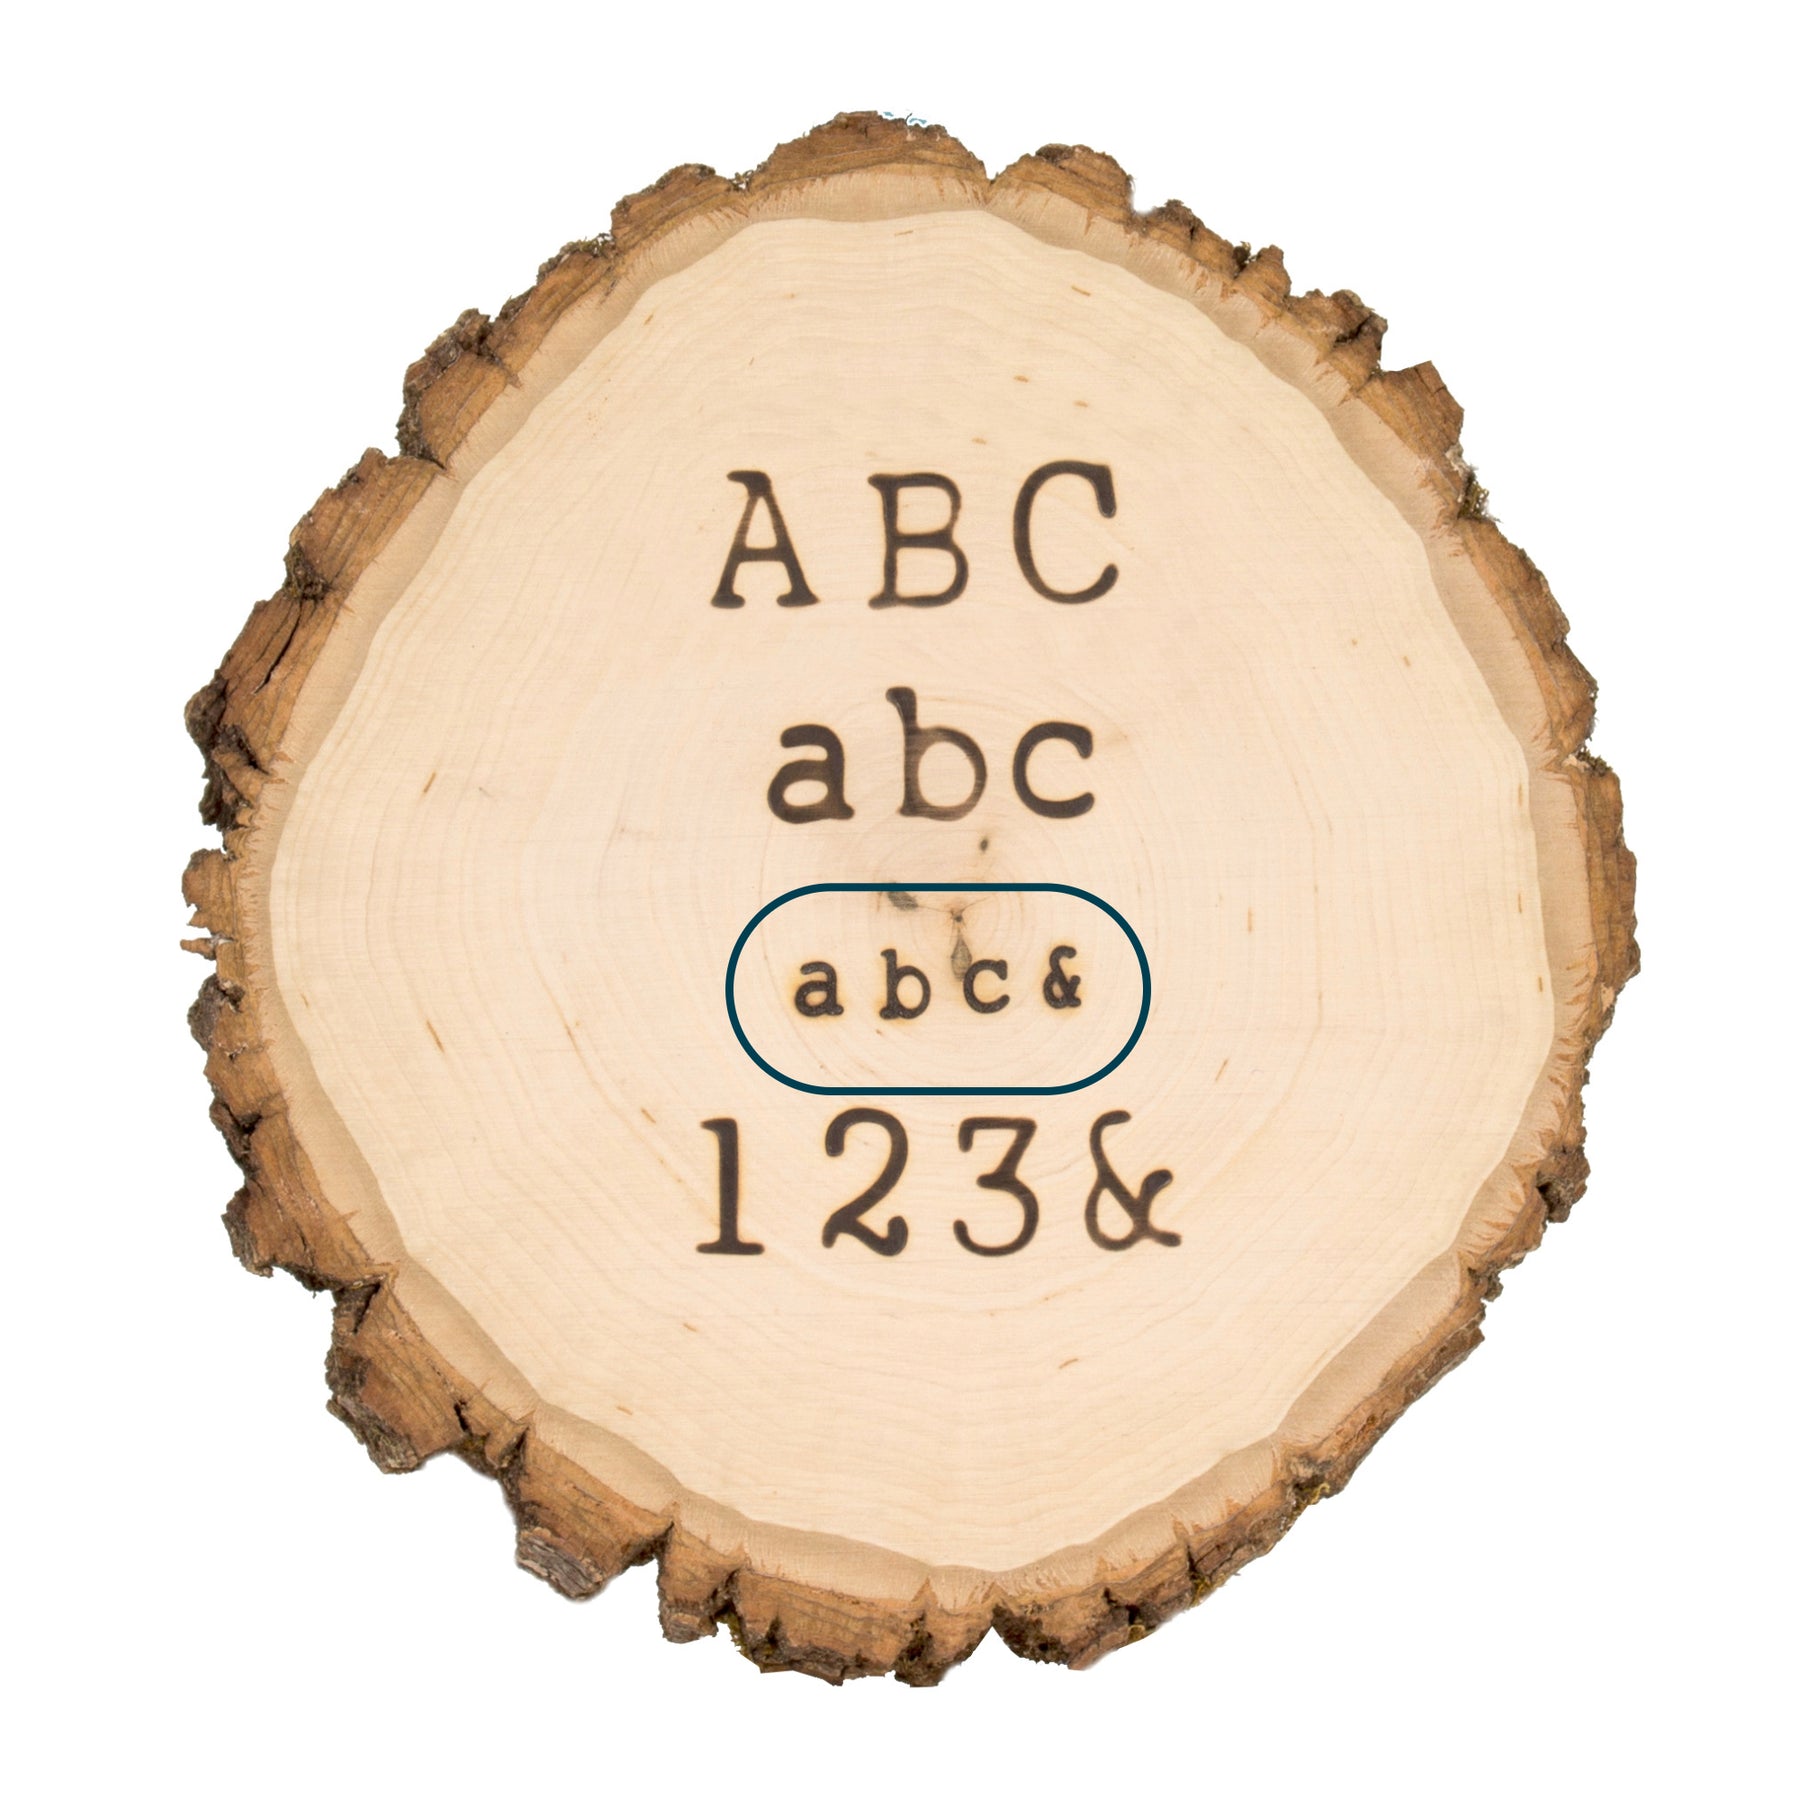  Walnut Hollow HotStamp Lowercase Alphabet Set for Branding and  Personalization of Wood, Leather, and Other Surfaces, Various Brass Letter  Sizes, 26